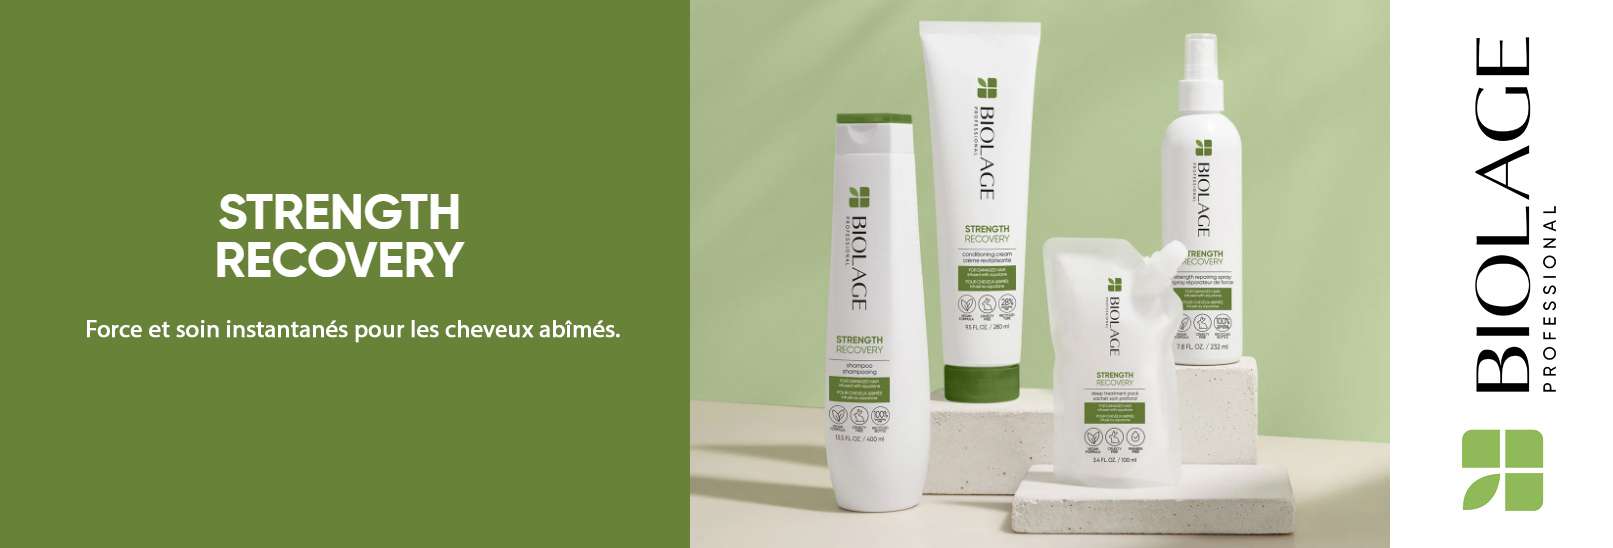 STRENGTH RECOVERY BIOLAGE